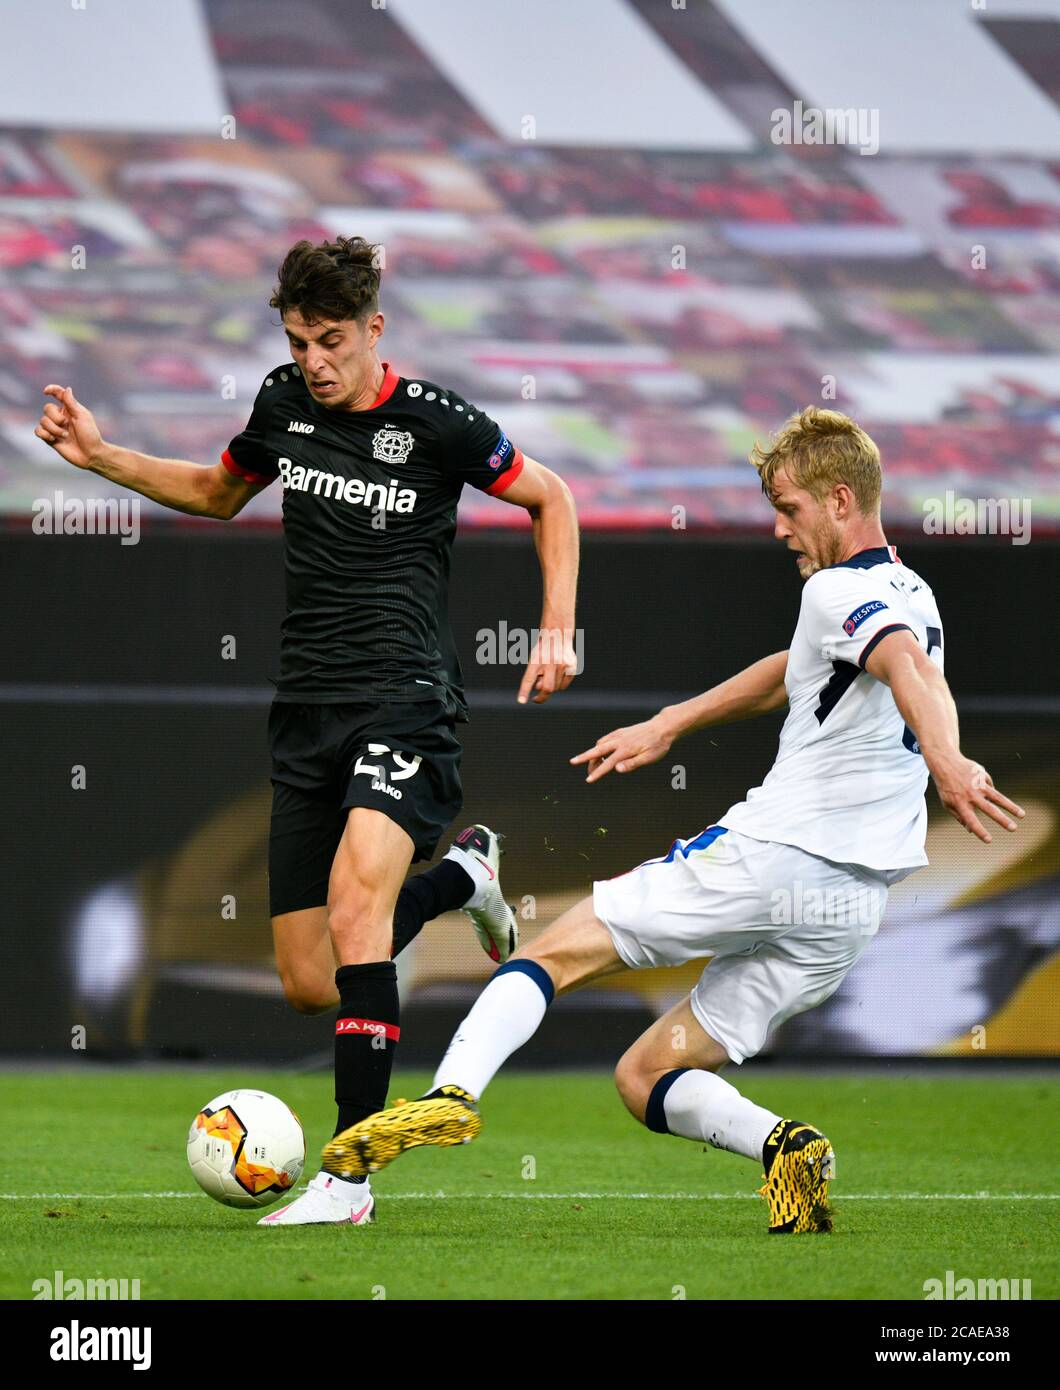 Leverkusen, Germany. 06th Aug, 2020. Football: Europa League, Bayer Leverkusen - Glasgow Rangers, knockout rounds, round of 16, second leg at the BayArena. Kai Havertz from Bayer 04 Leverkusen fights for the ball with Filip Helander (r) from Rangers. Credit: Sascha Schuermann/AFP-Pool/dpa/Alamy Live News Stock Photo